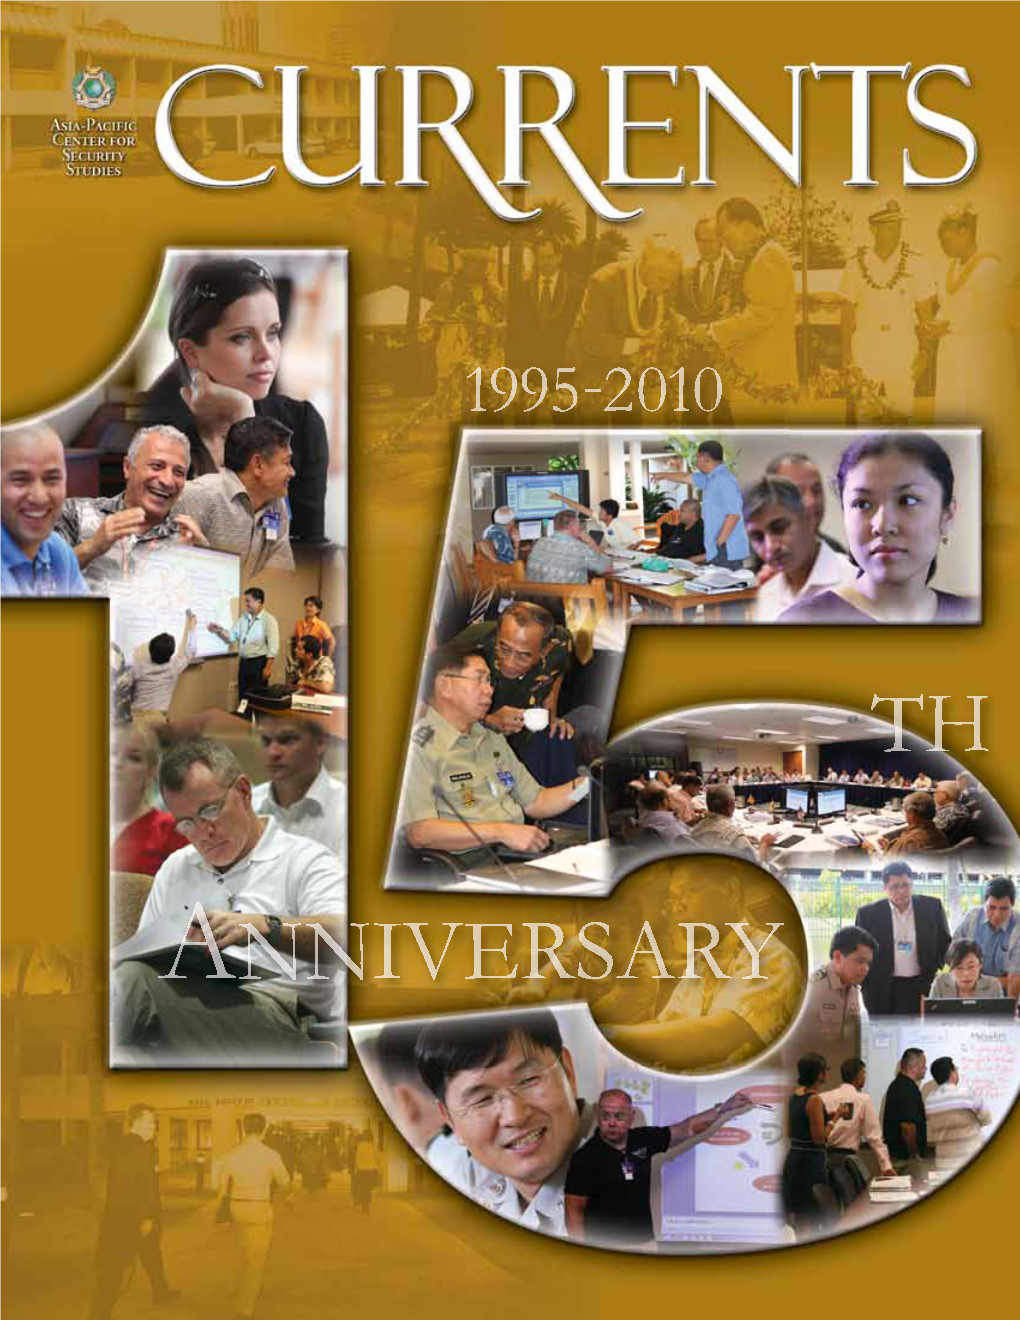 Currents Magazine Is an Unofficial Publication Produced Biannually by the Asia-Pacific Center for Security Stud- Ies Public Affairs Office